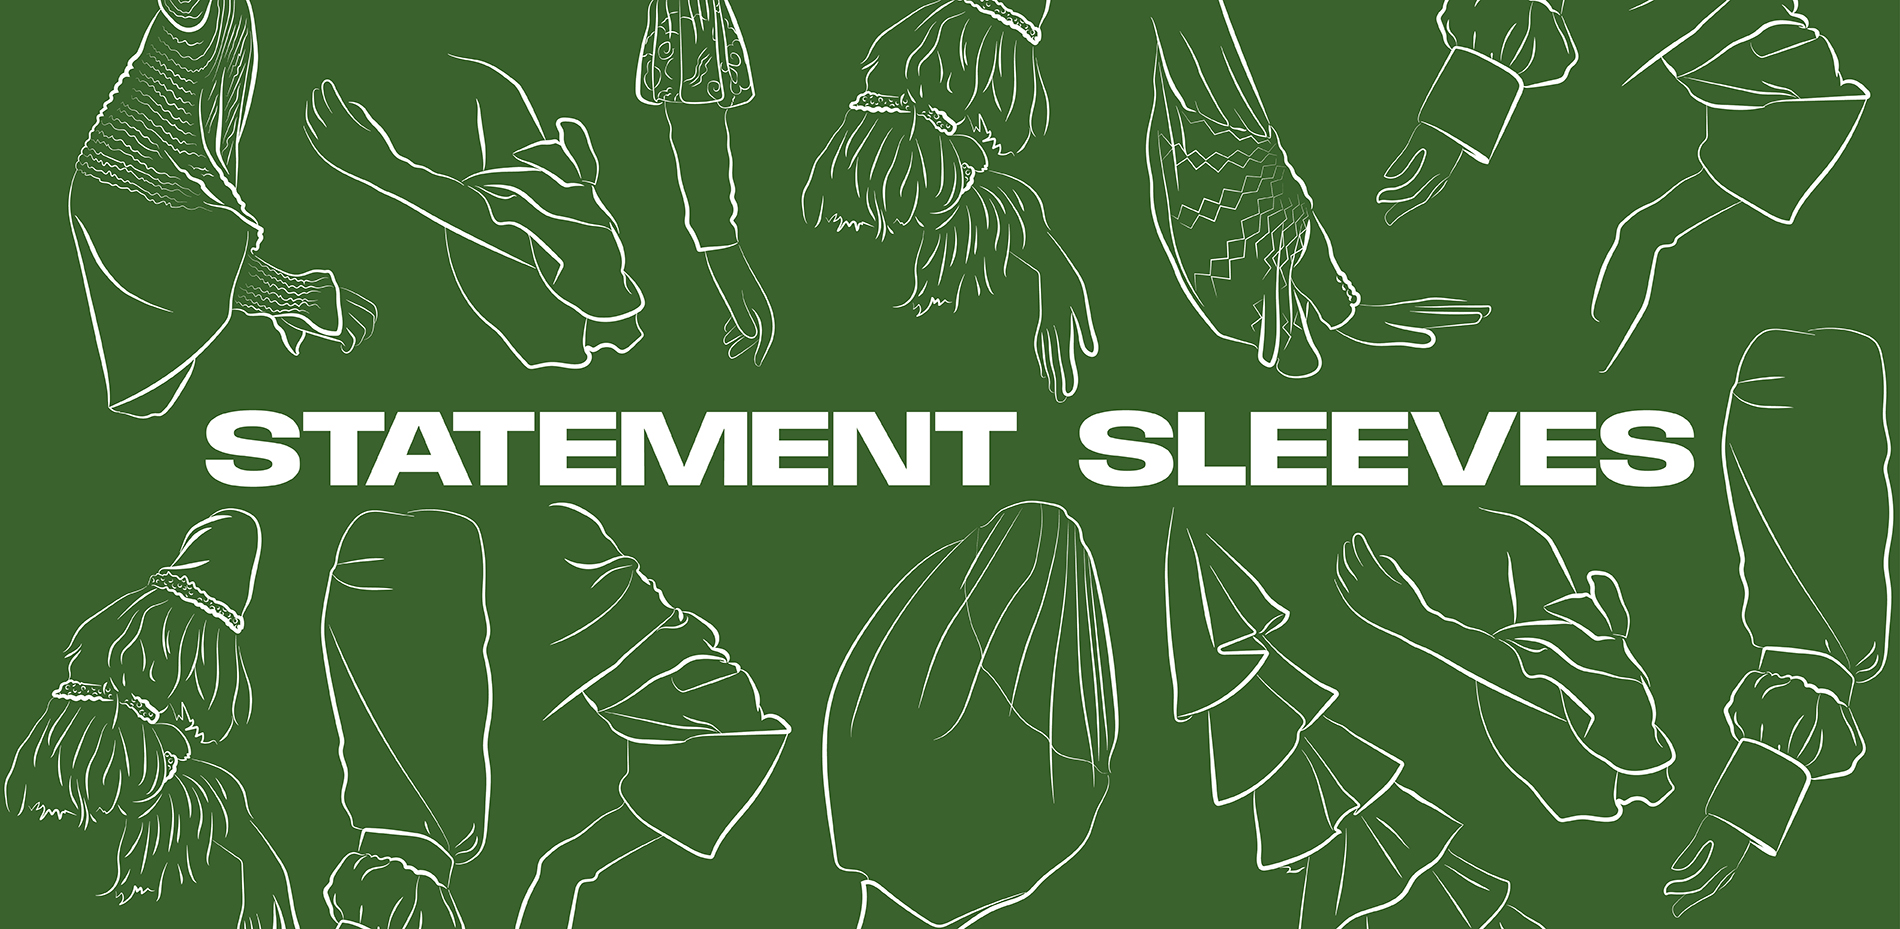 the words statement sleeves surrounded by line drawings of various sleeve types